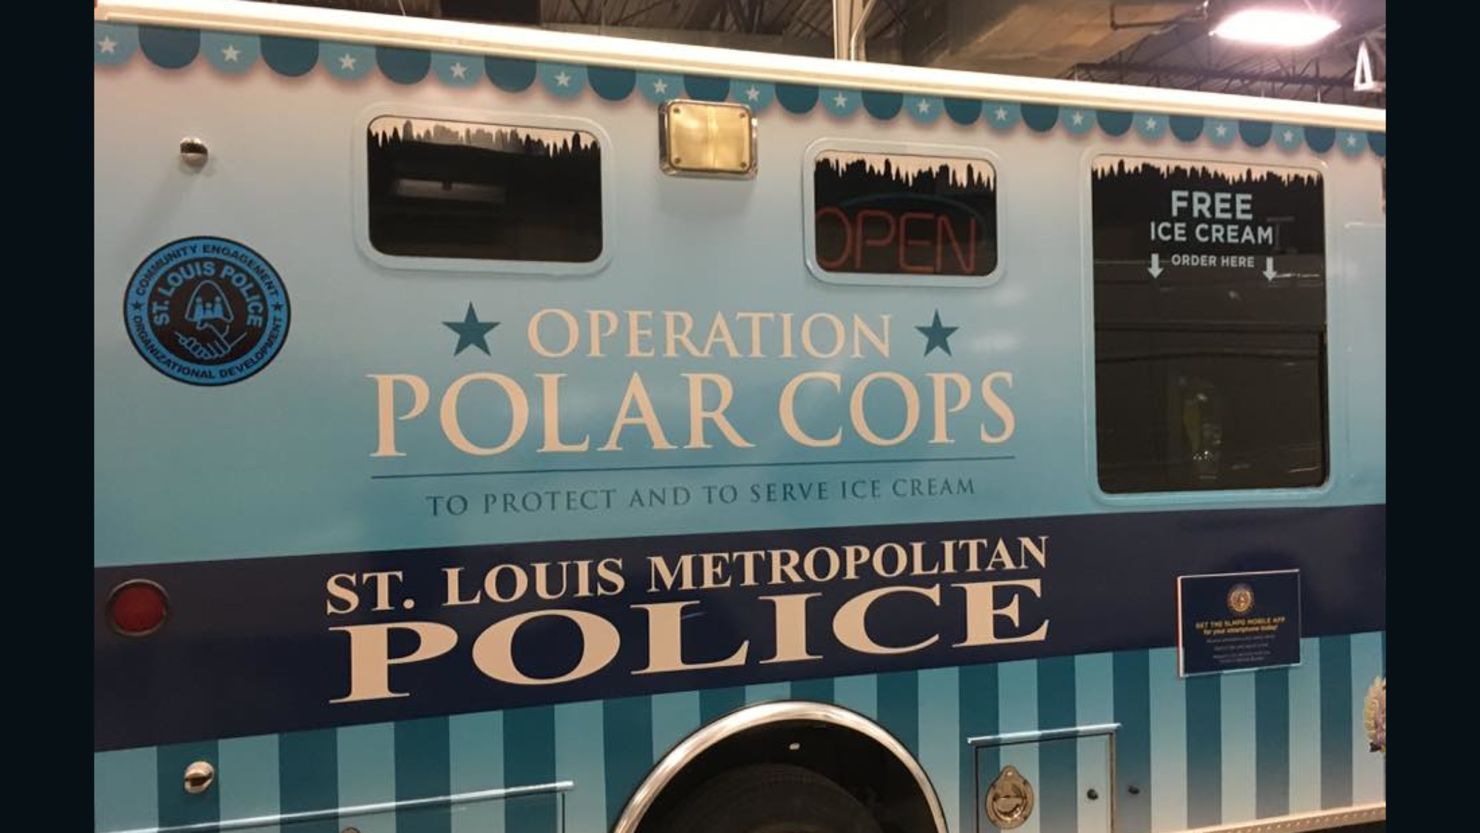 Operation Polar Cops hit the streets of St. Louis this week.